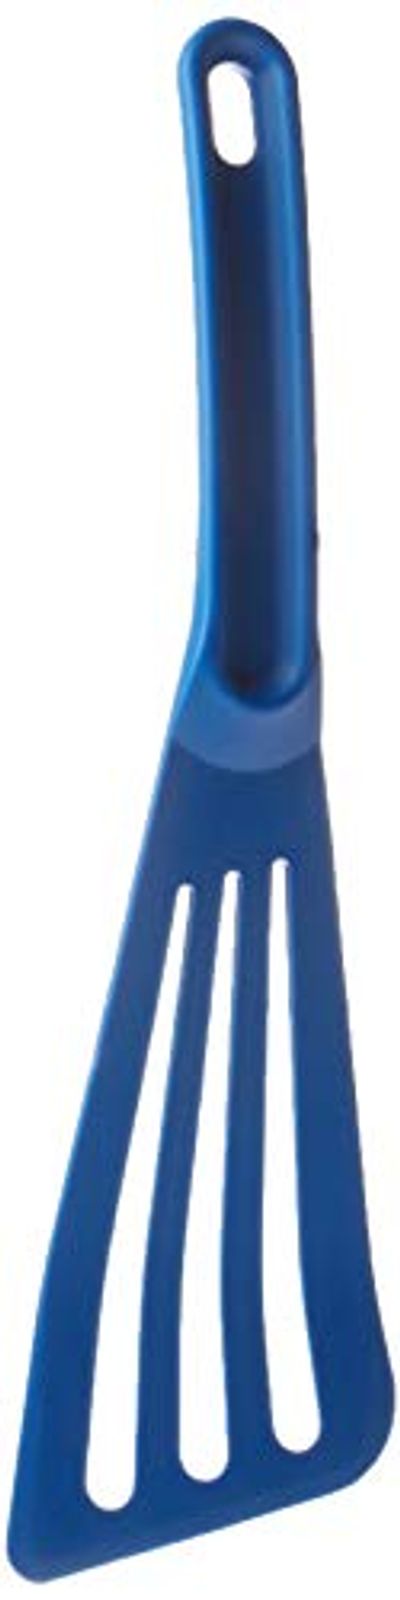 Mercer Culinary Hell's Tools Hi-Heat 12 by 3.5-Inch Slotted Spatula, Blue $13 (Reg $14.29)